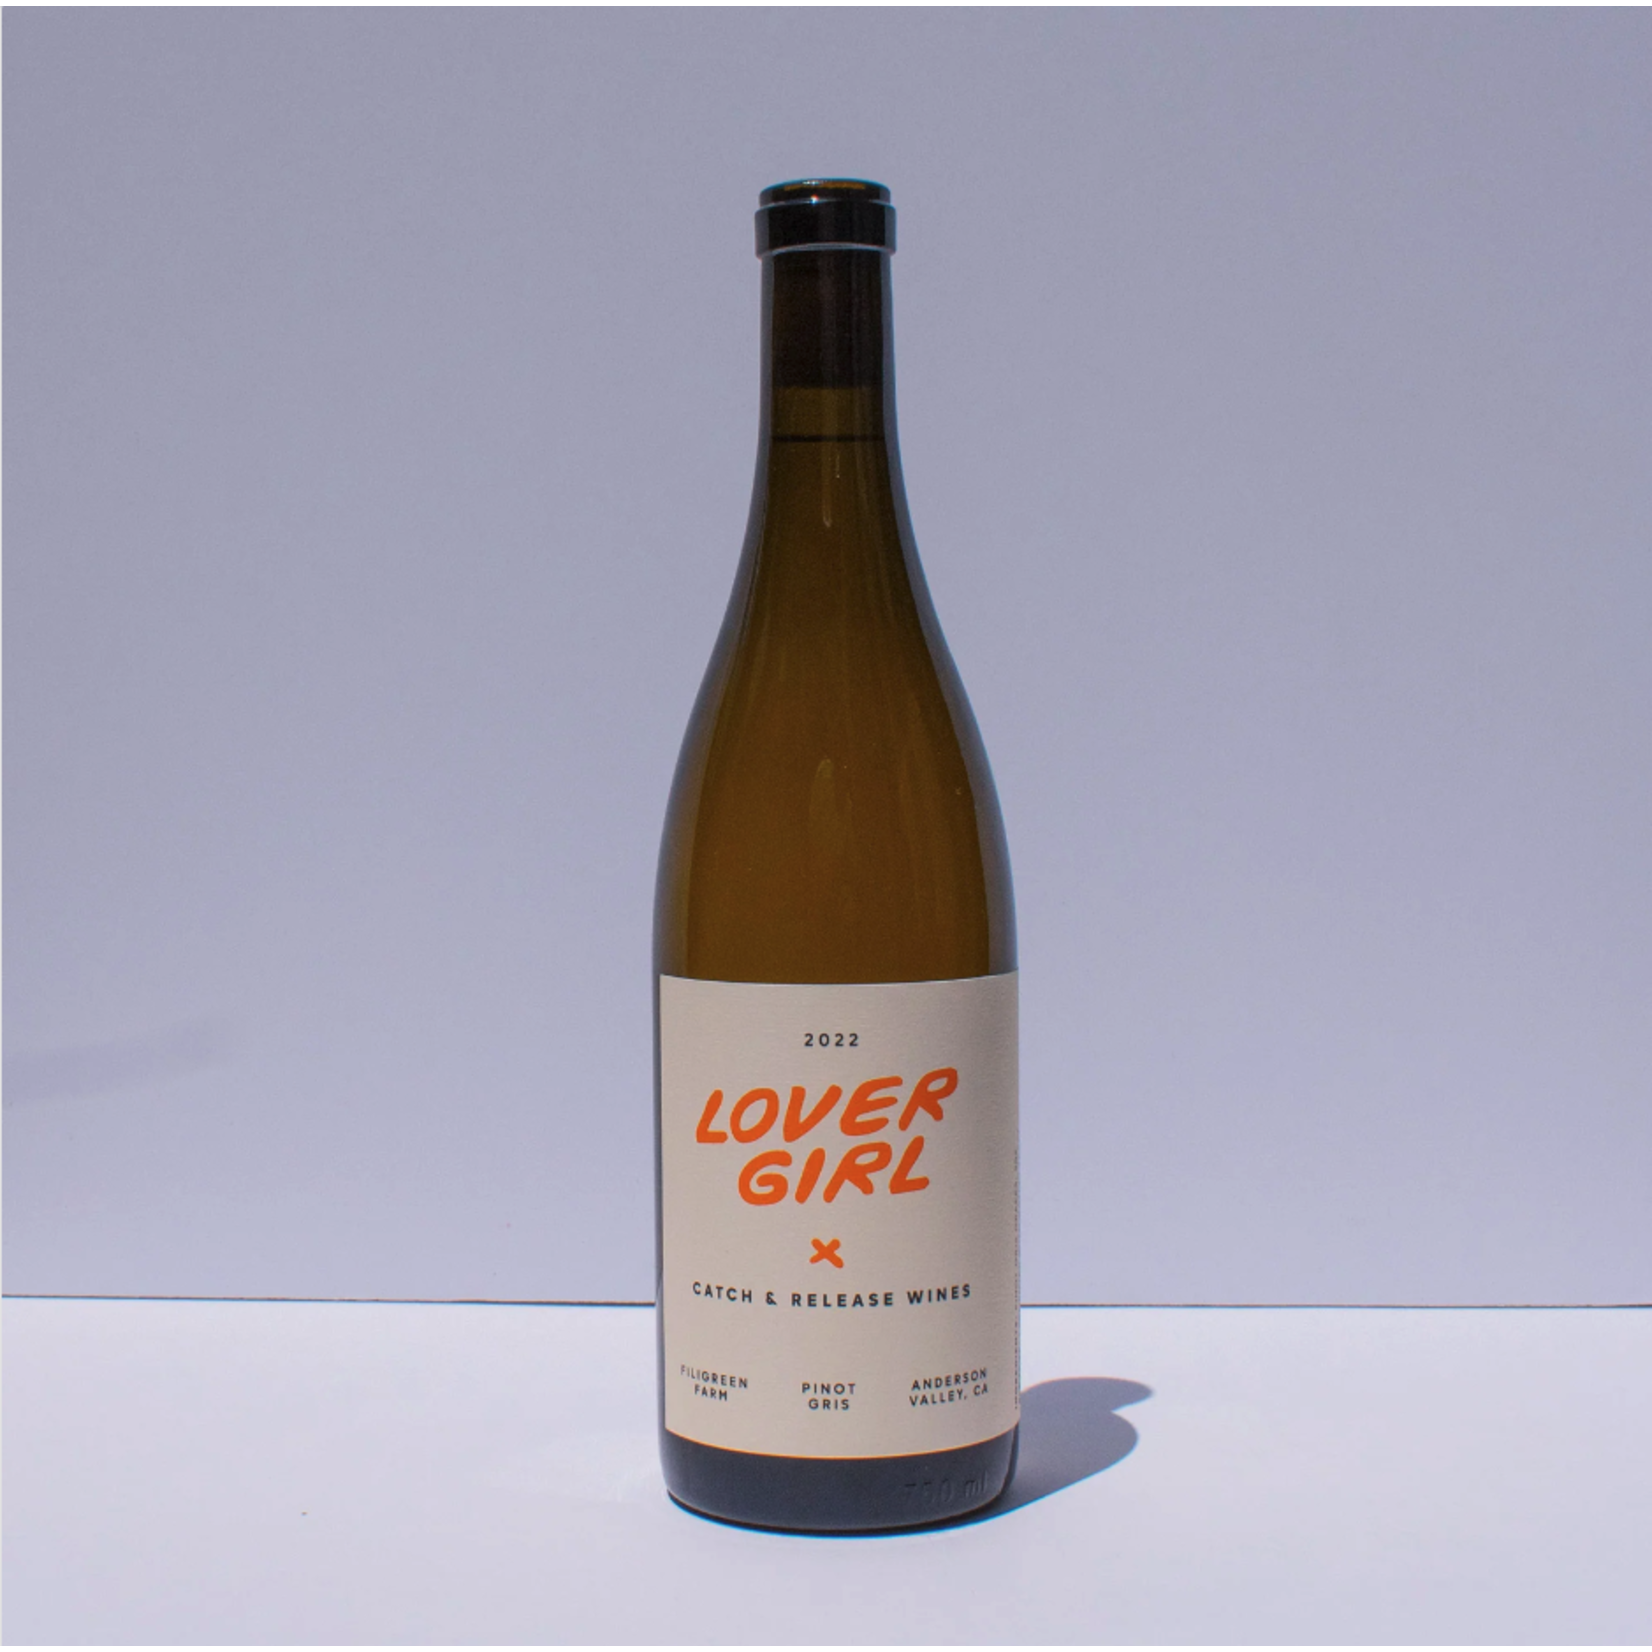 Wine Catch & Release 'Lover Girl' Pinot Gris Anderson Valley 2022